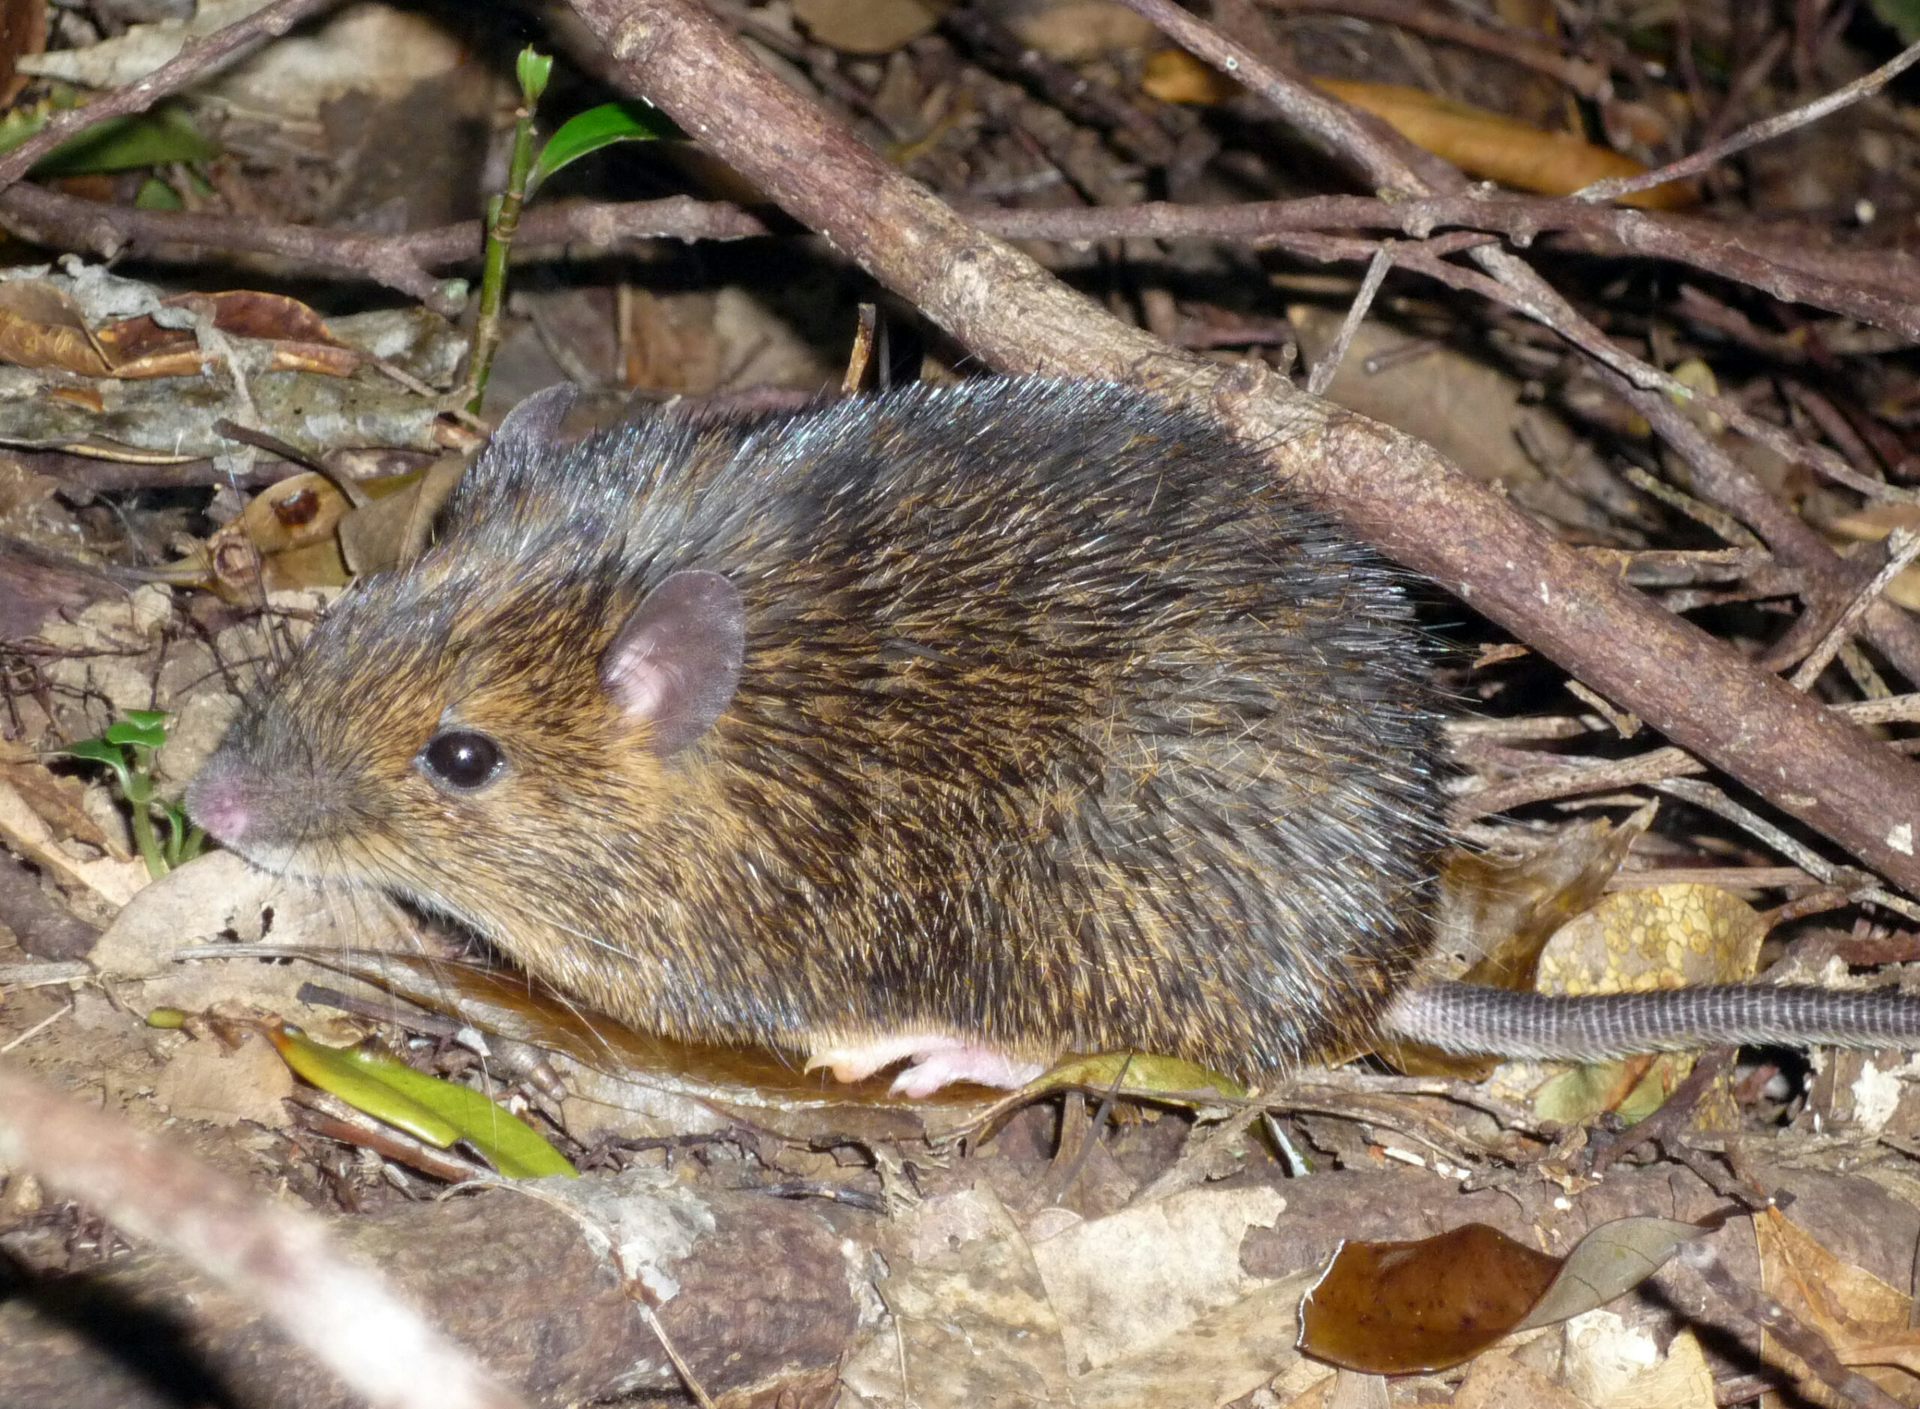 A small brown rodent sitting on leaf litter among branches